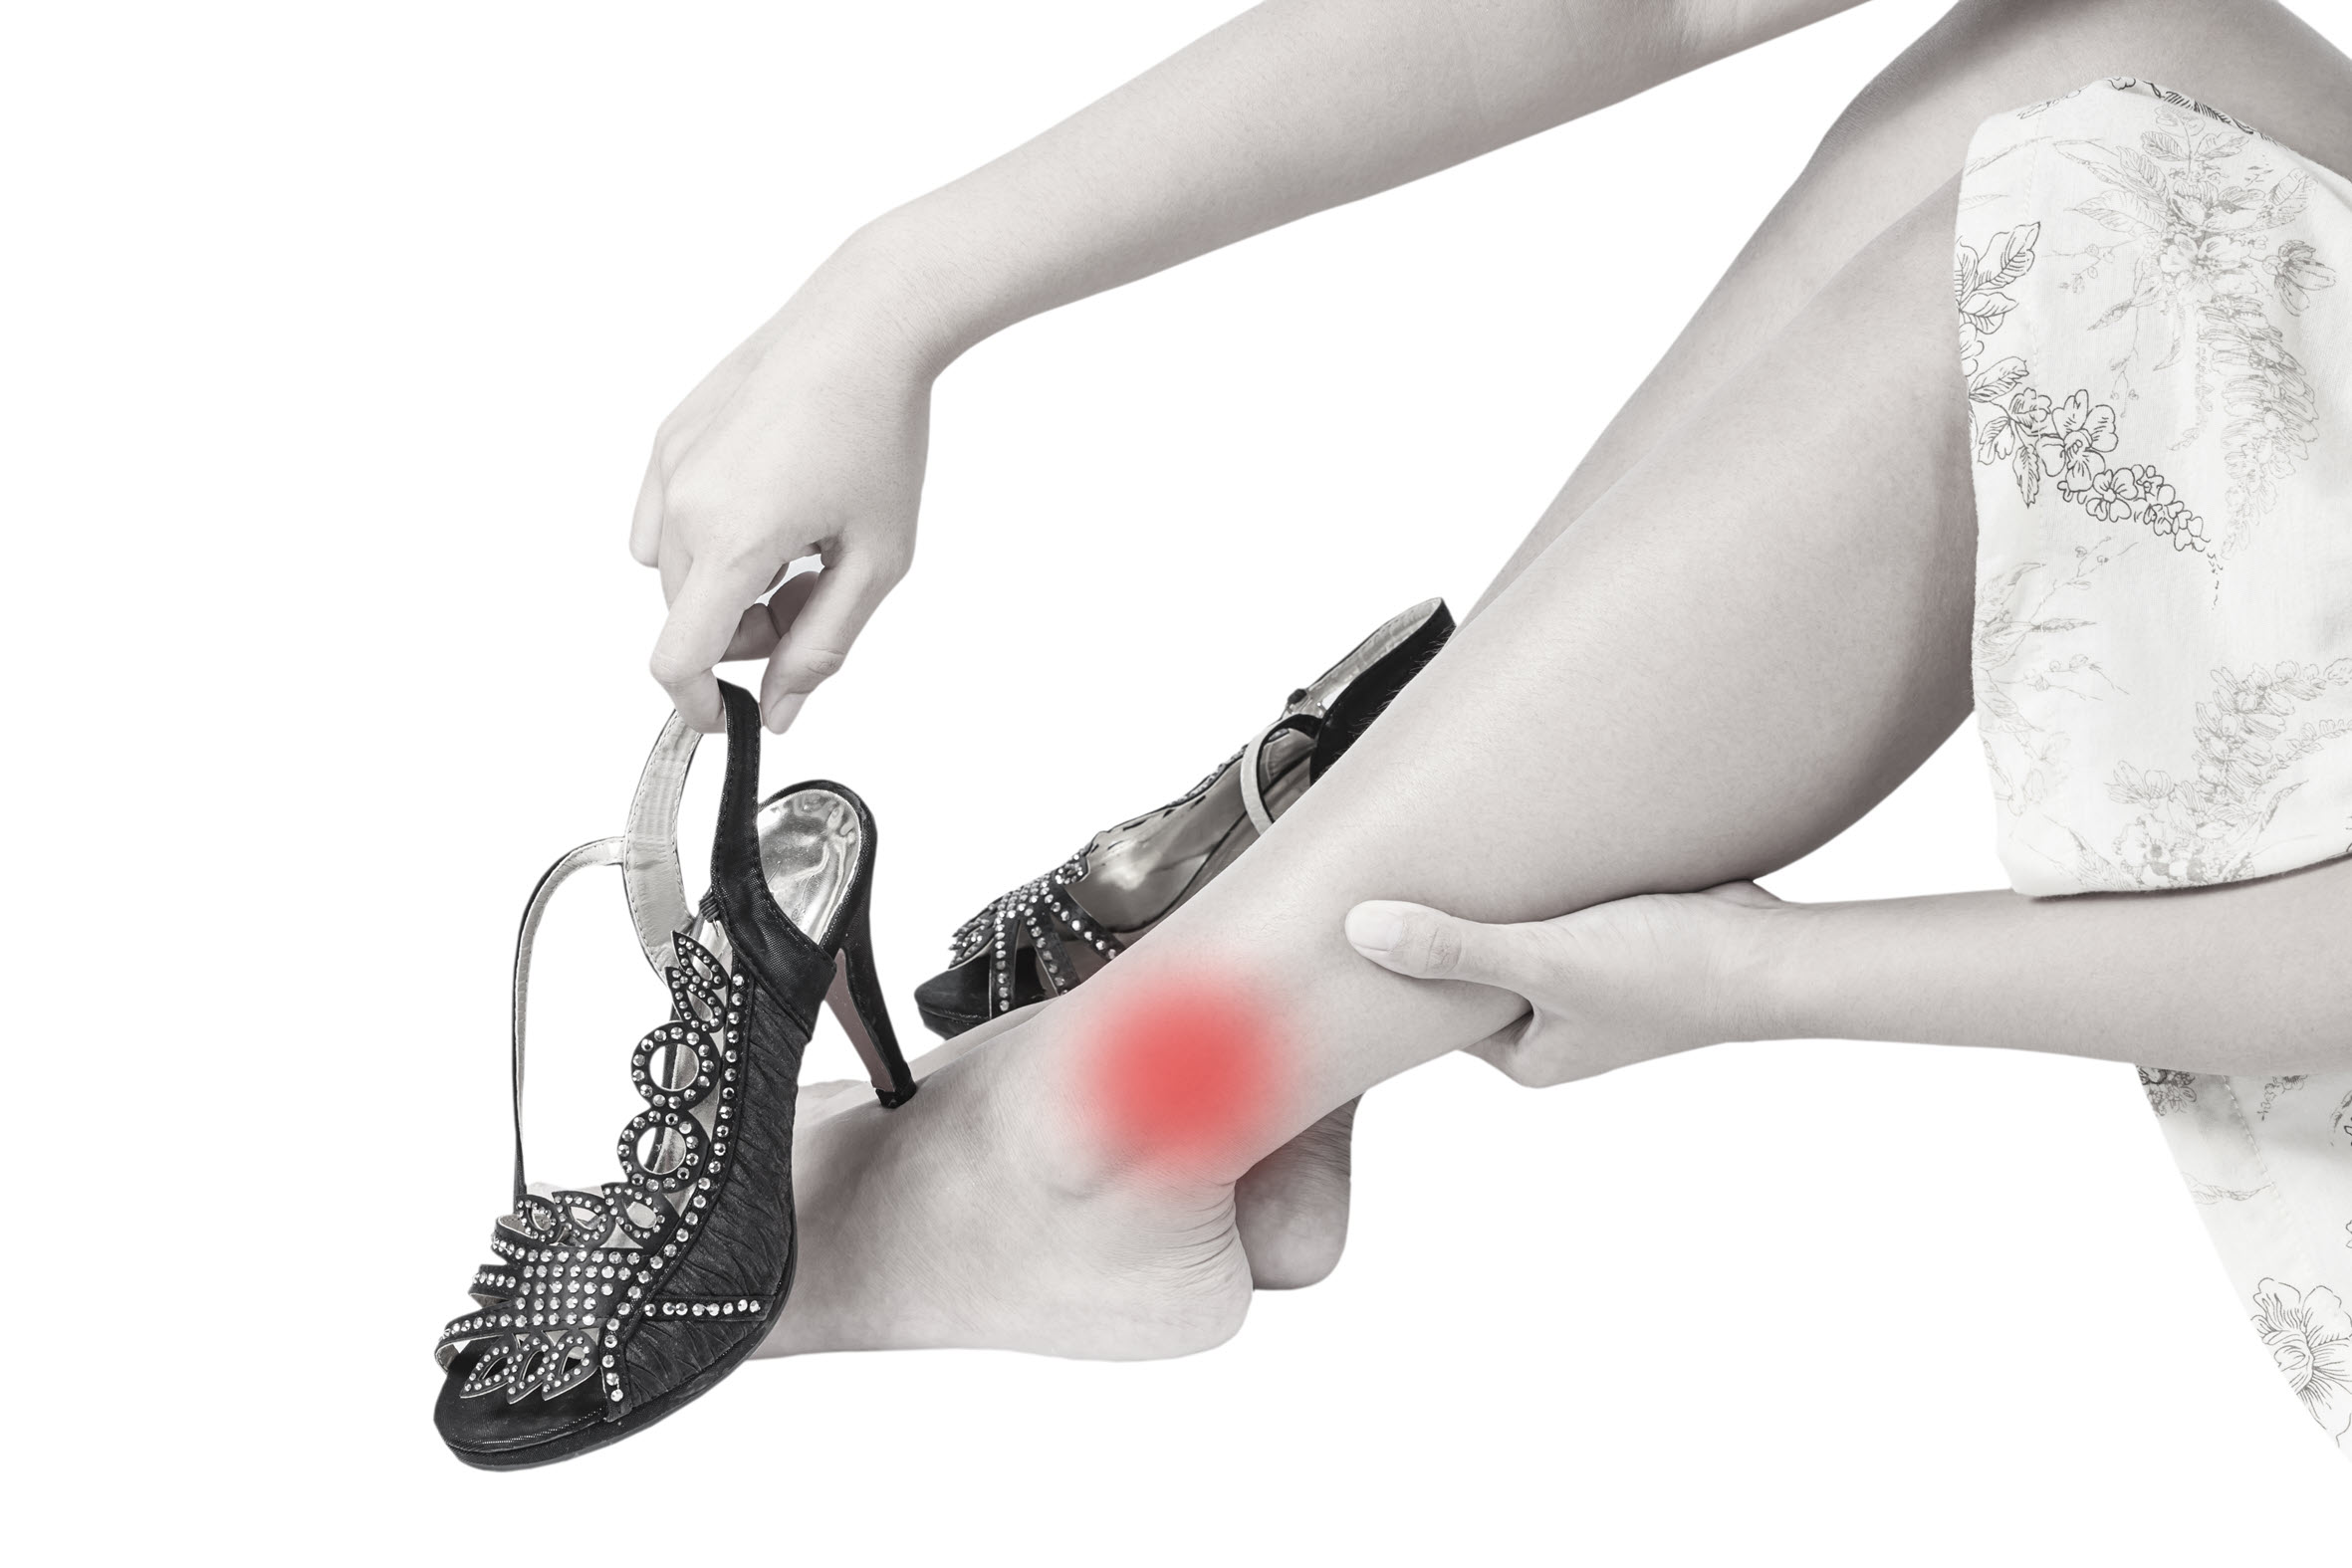 Plantar Fasciitis So Bad I Can't Walk: Expert Advice On What You Need To Do